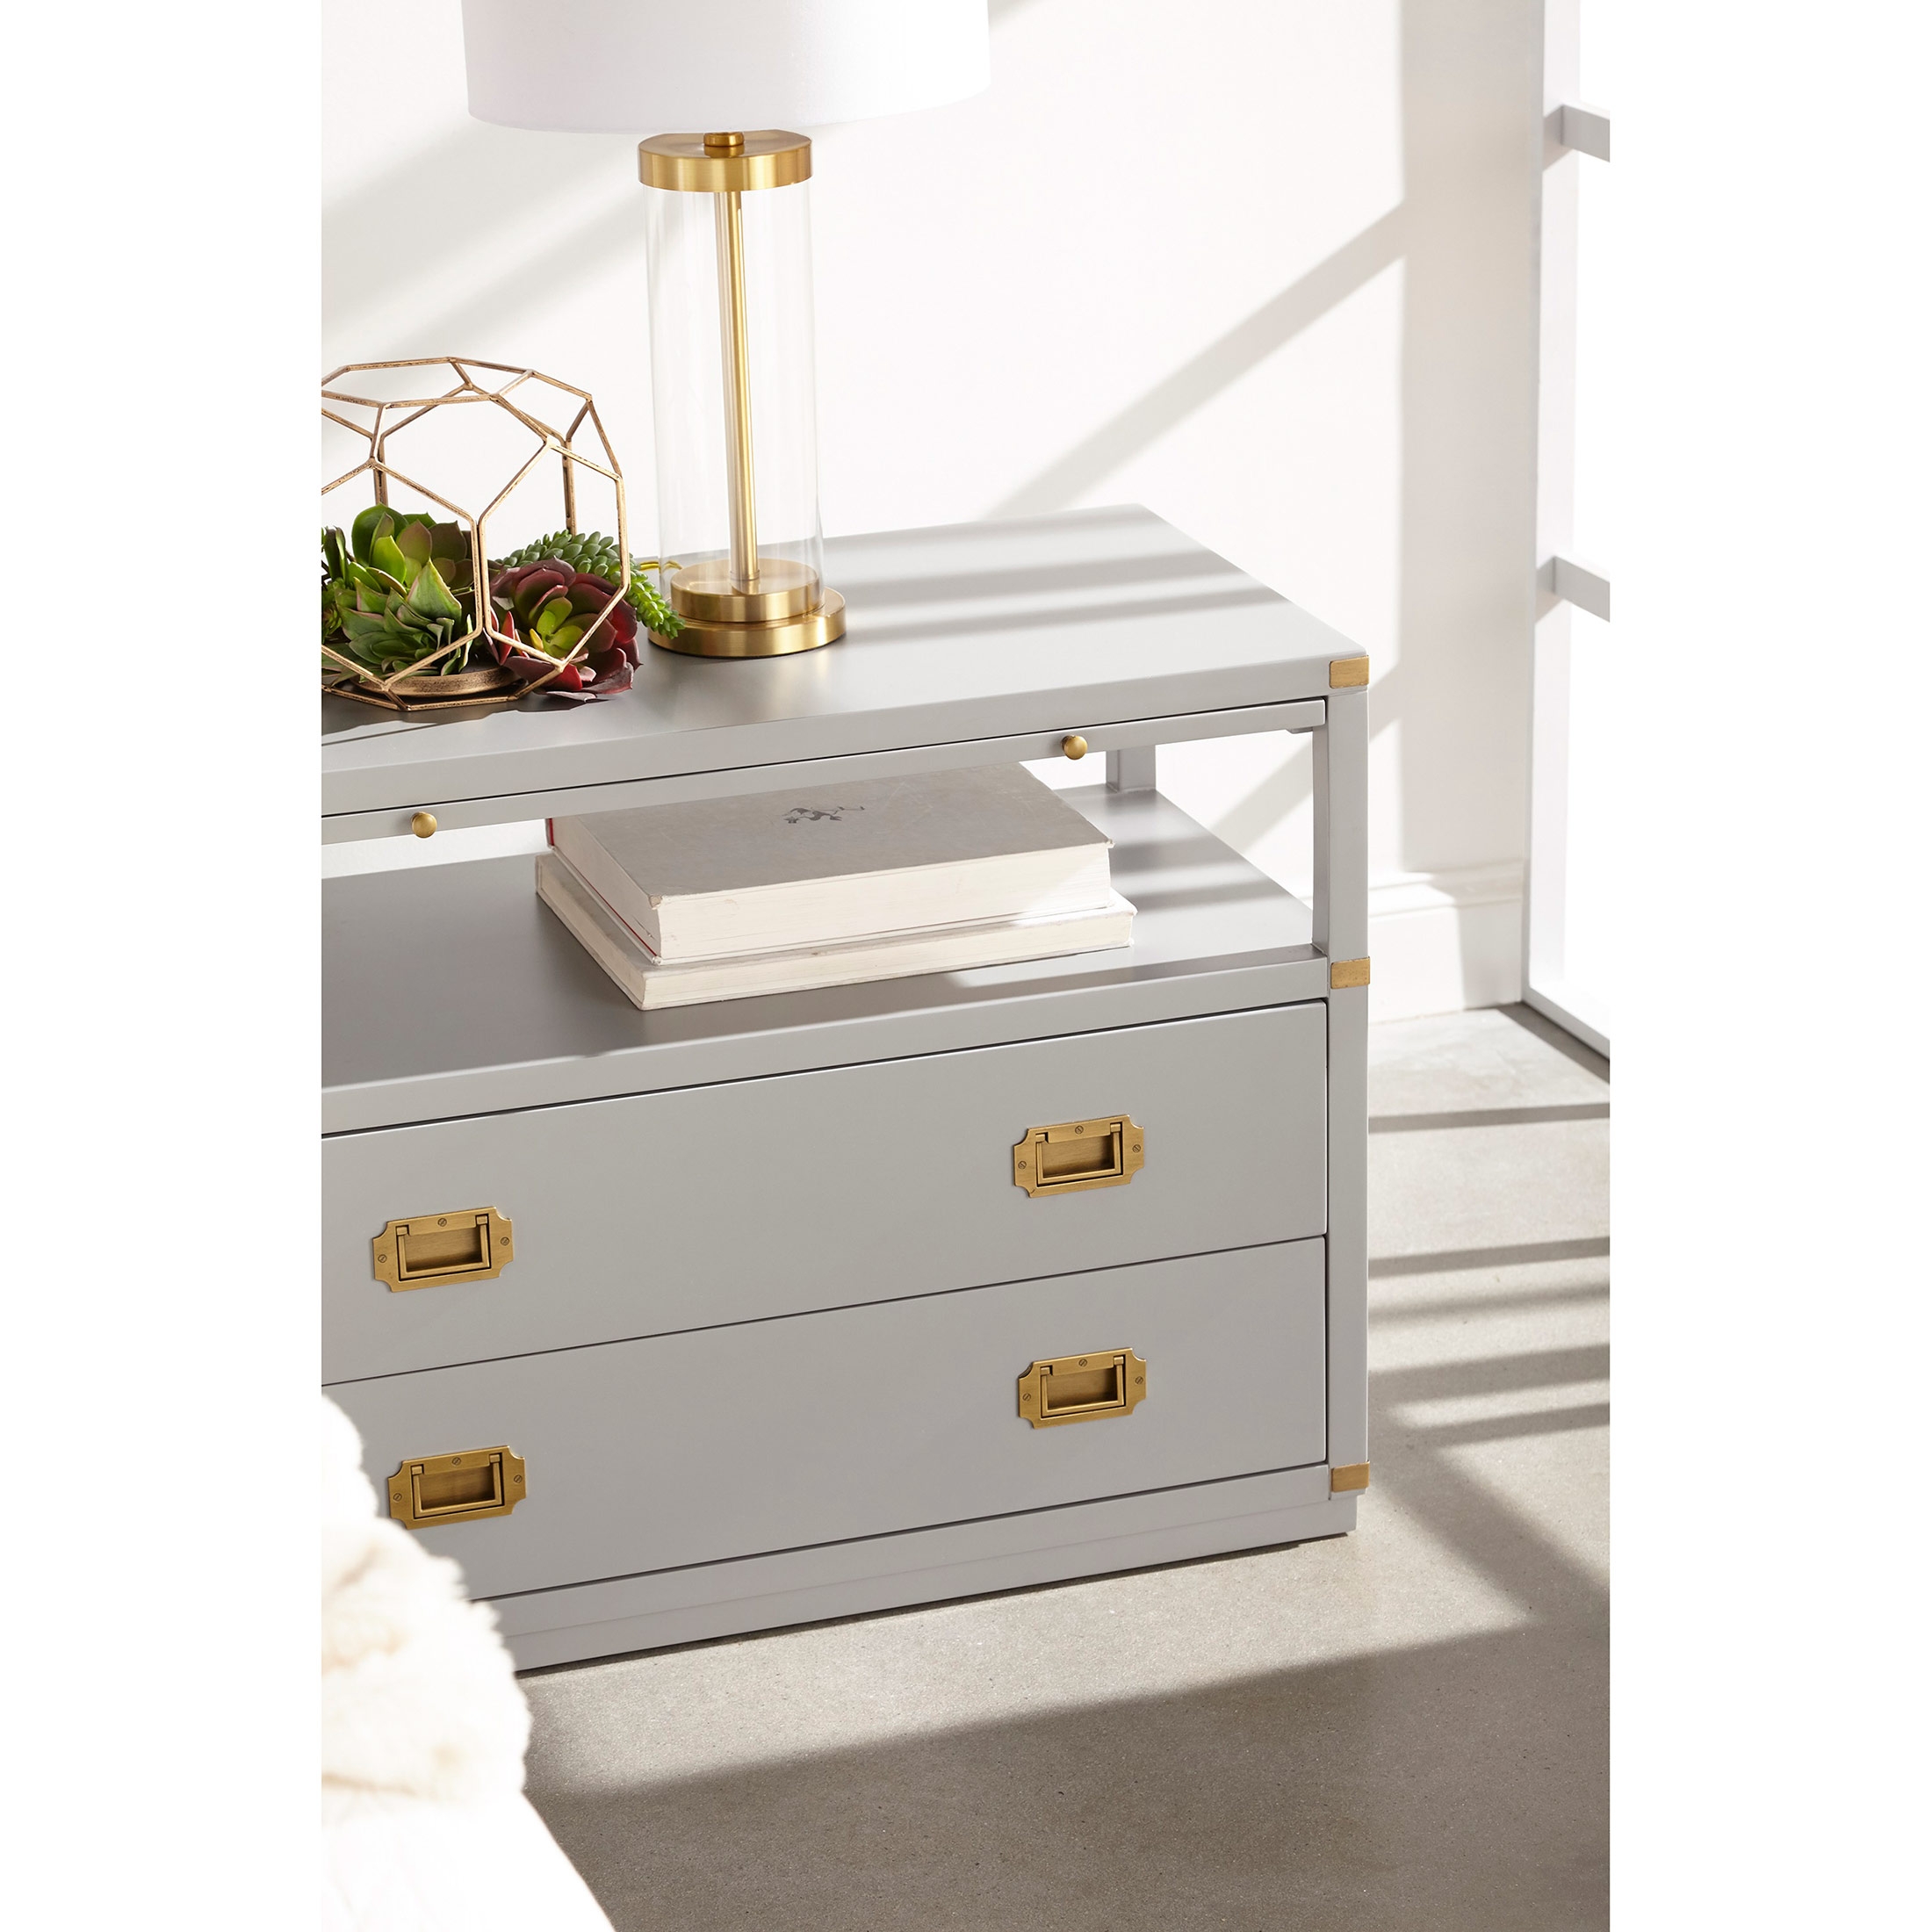 Bobby Modern Classic 2-Drawer Brushed Gold Pulls Dove Grey Nightstand - Image 3